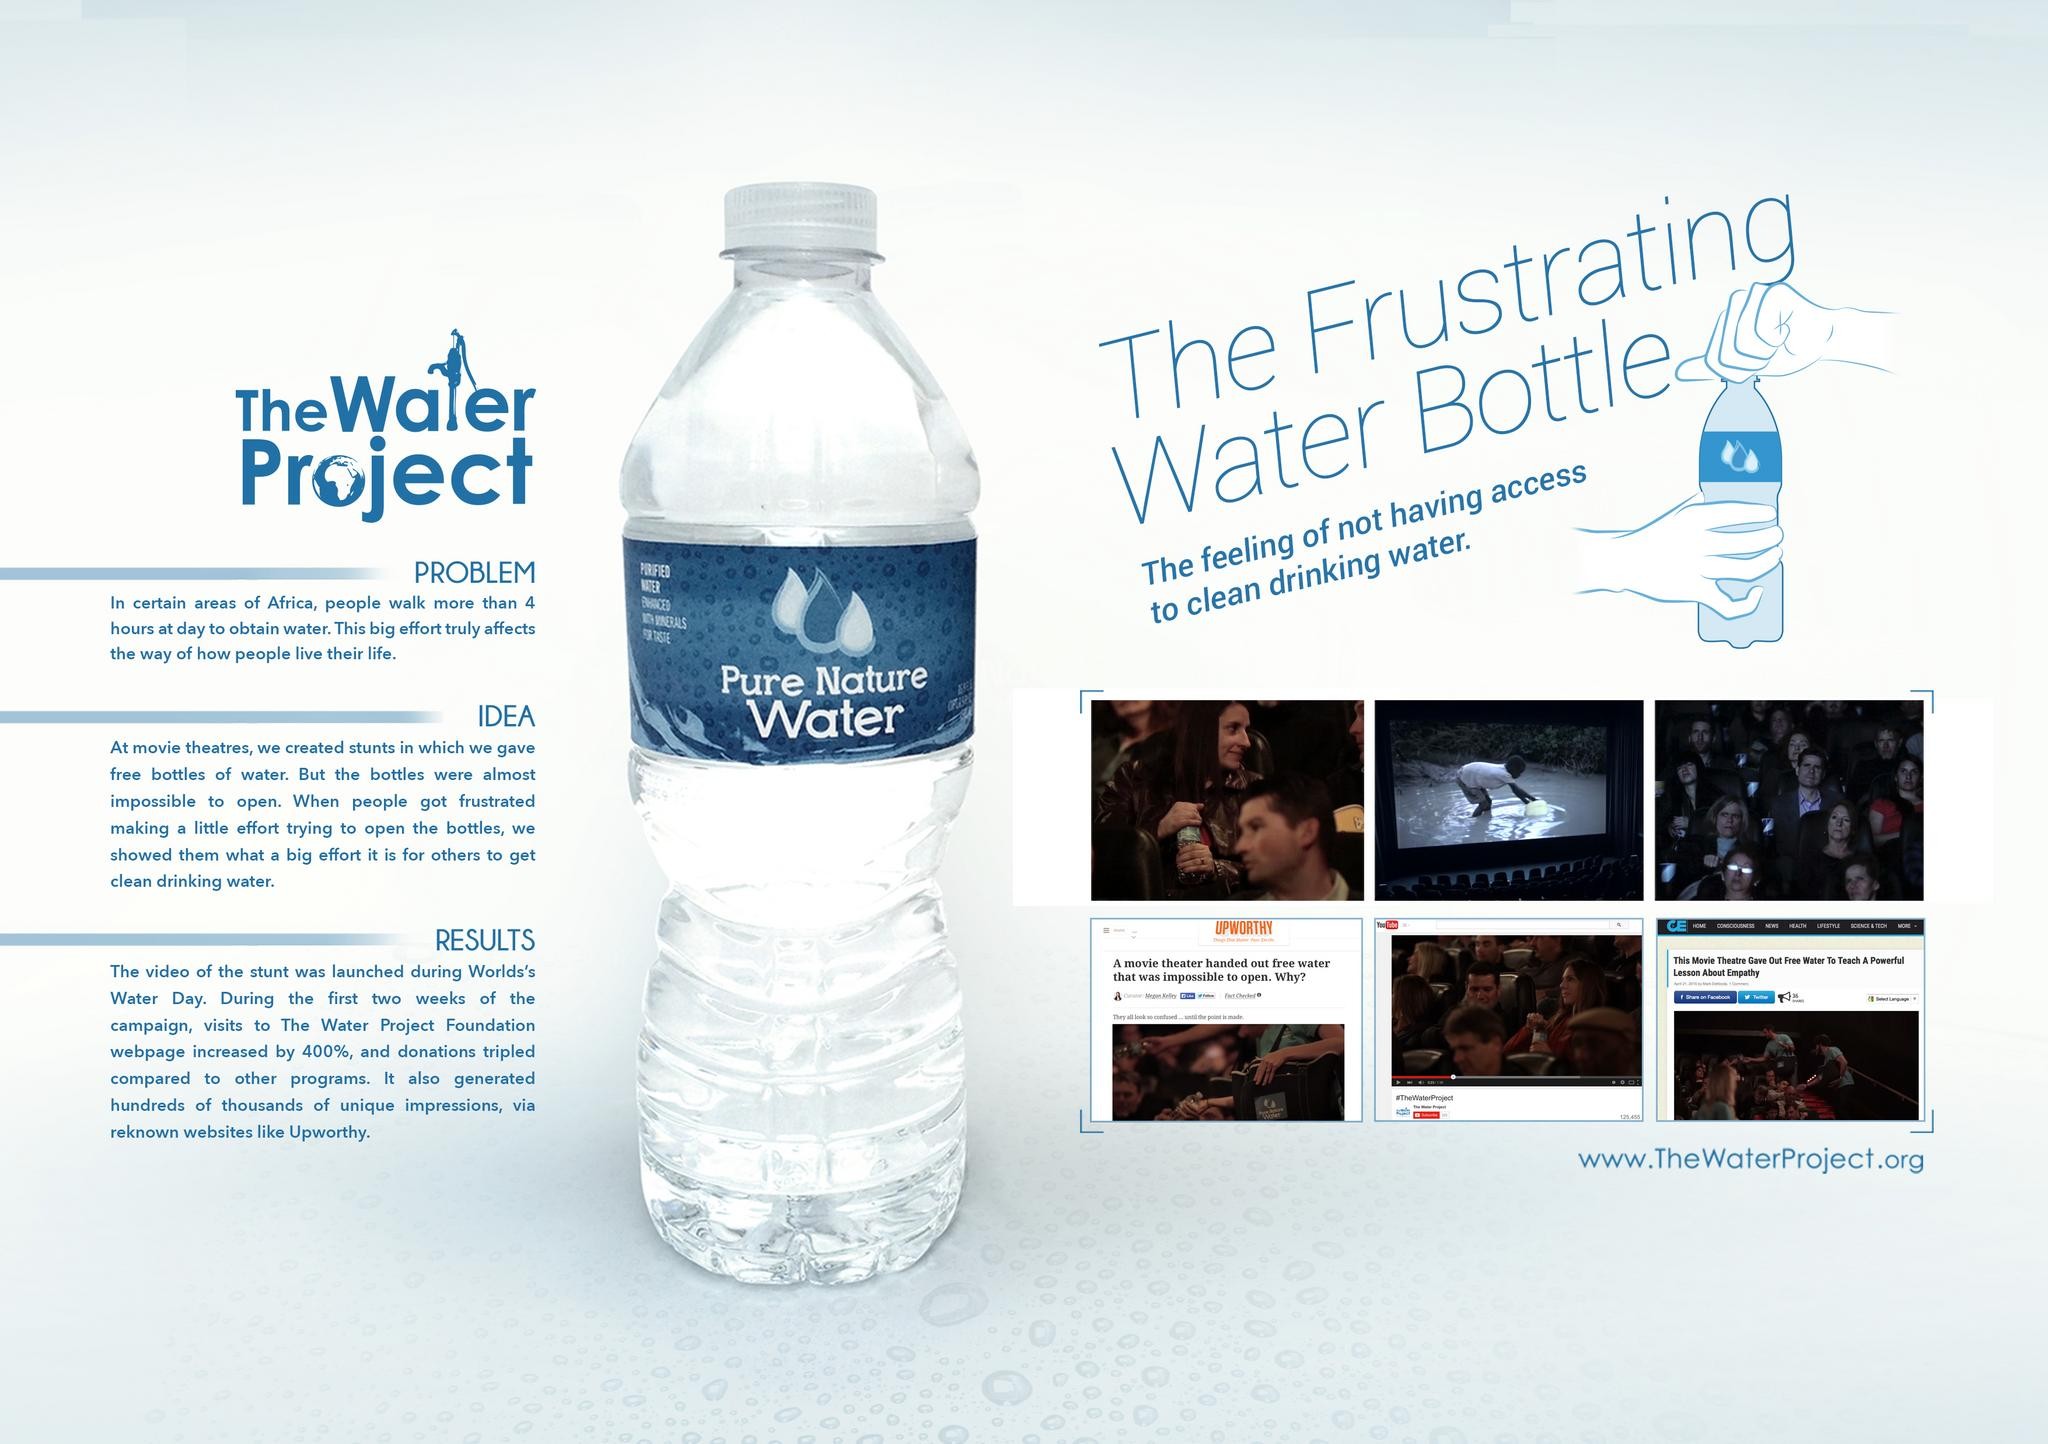 #THE WATER PROJECT